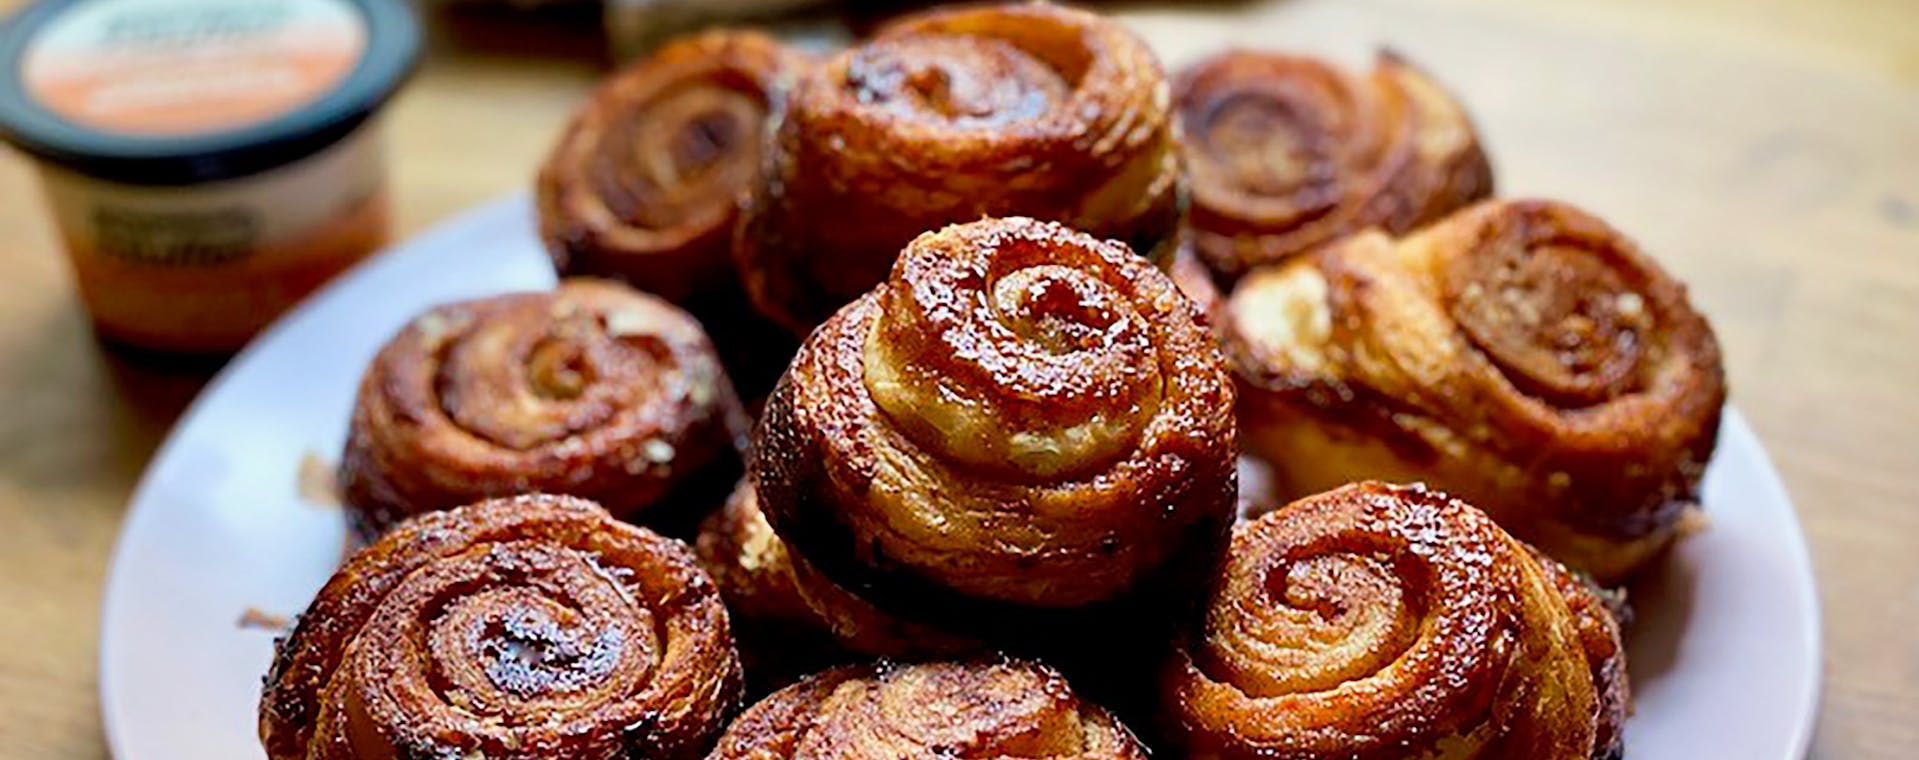 Sweet Rolls made with Cinnamon & Brown Sugar Butter